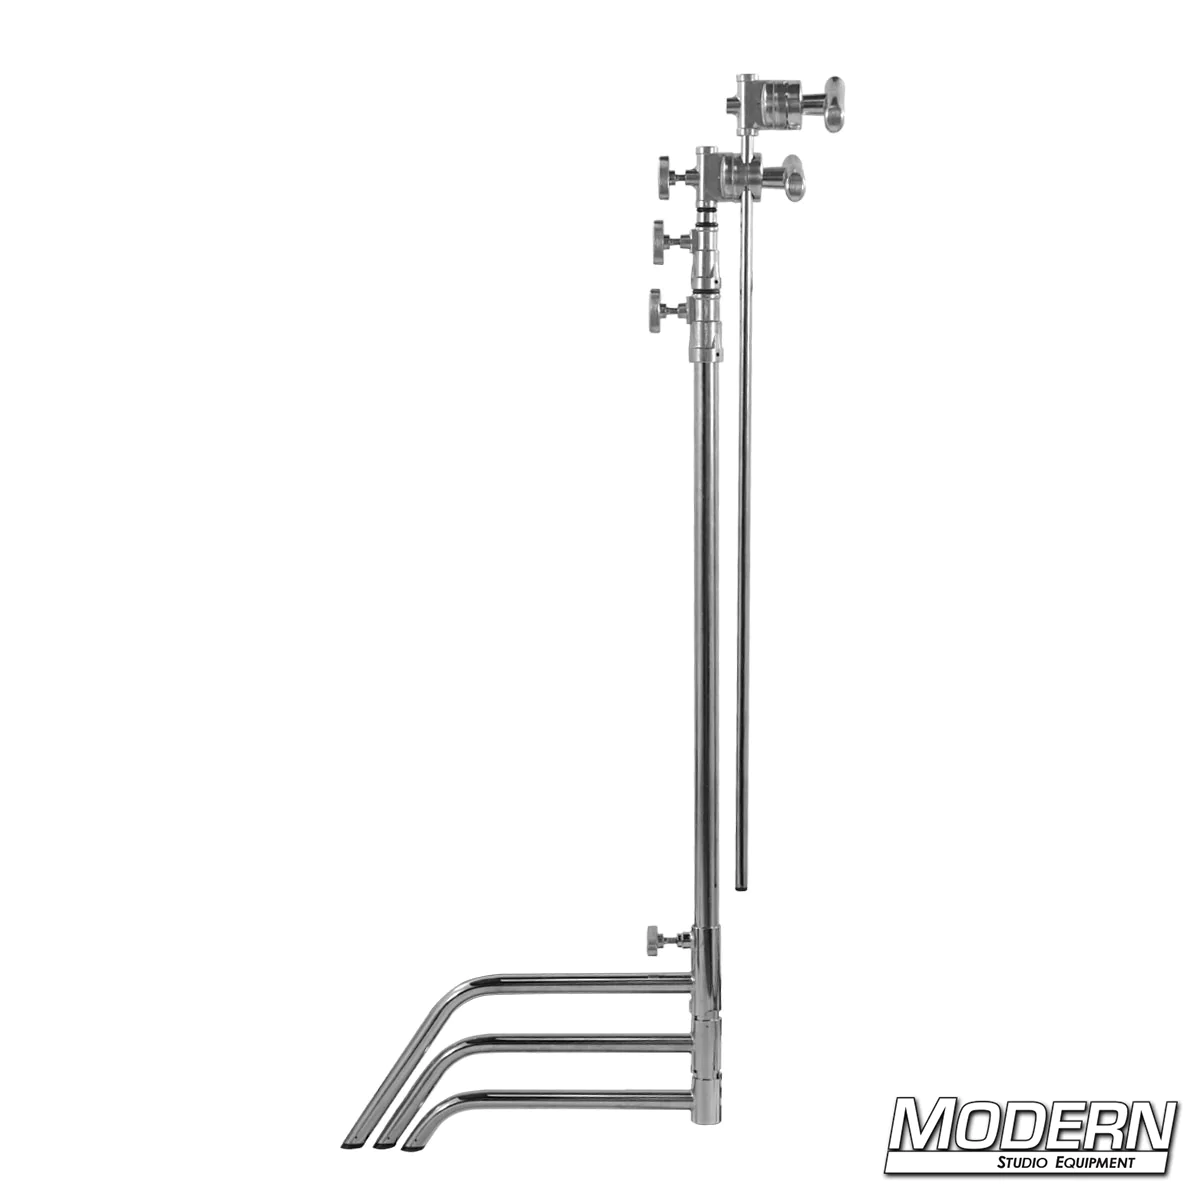 40" C-Stand Complete With Grip Head & 40" Extension Arm (Norms Brand)